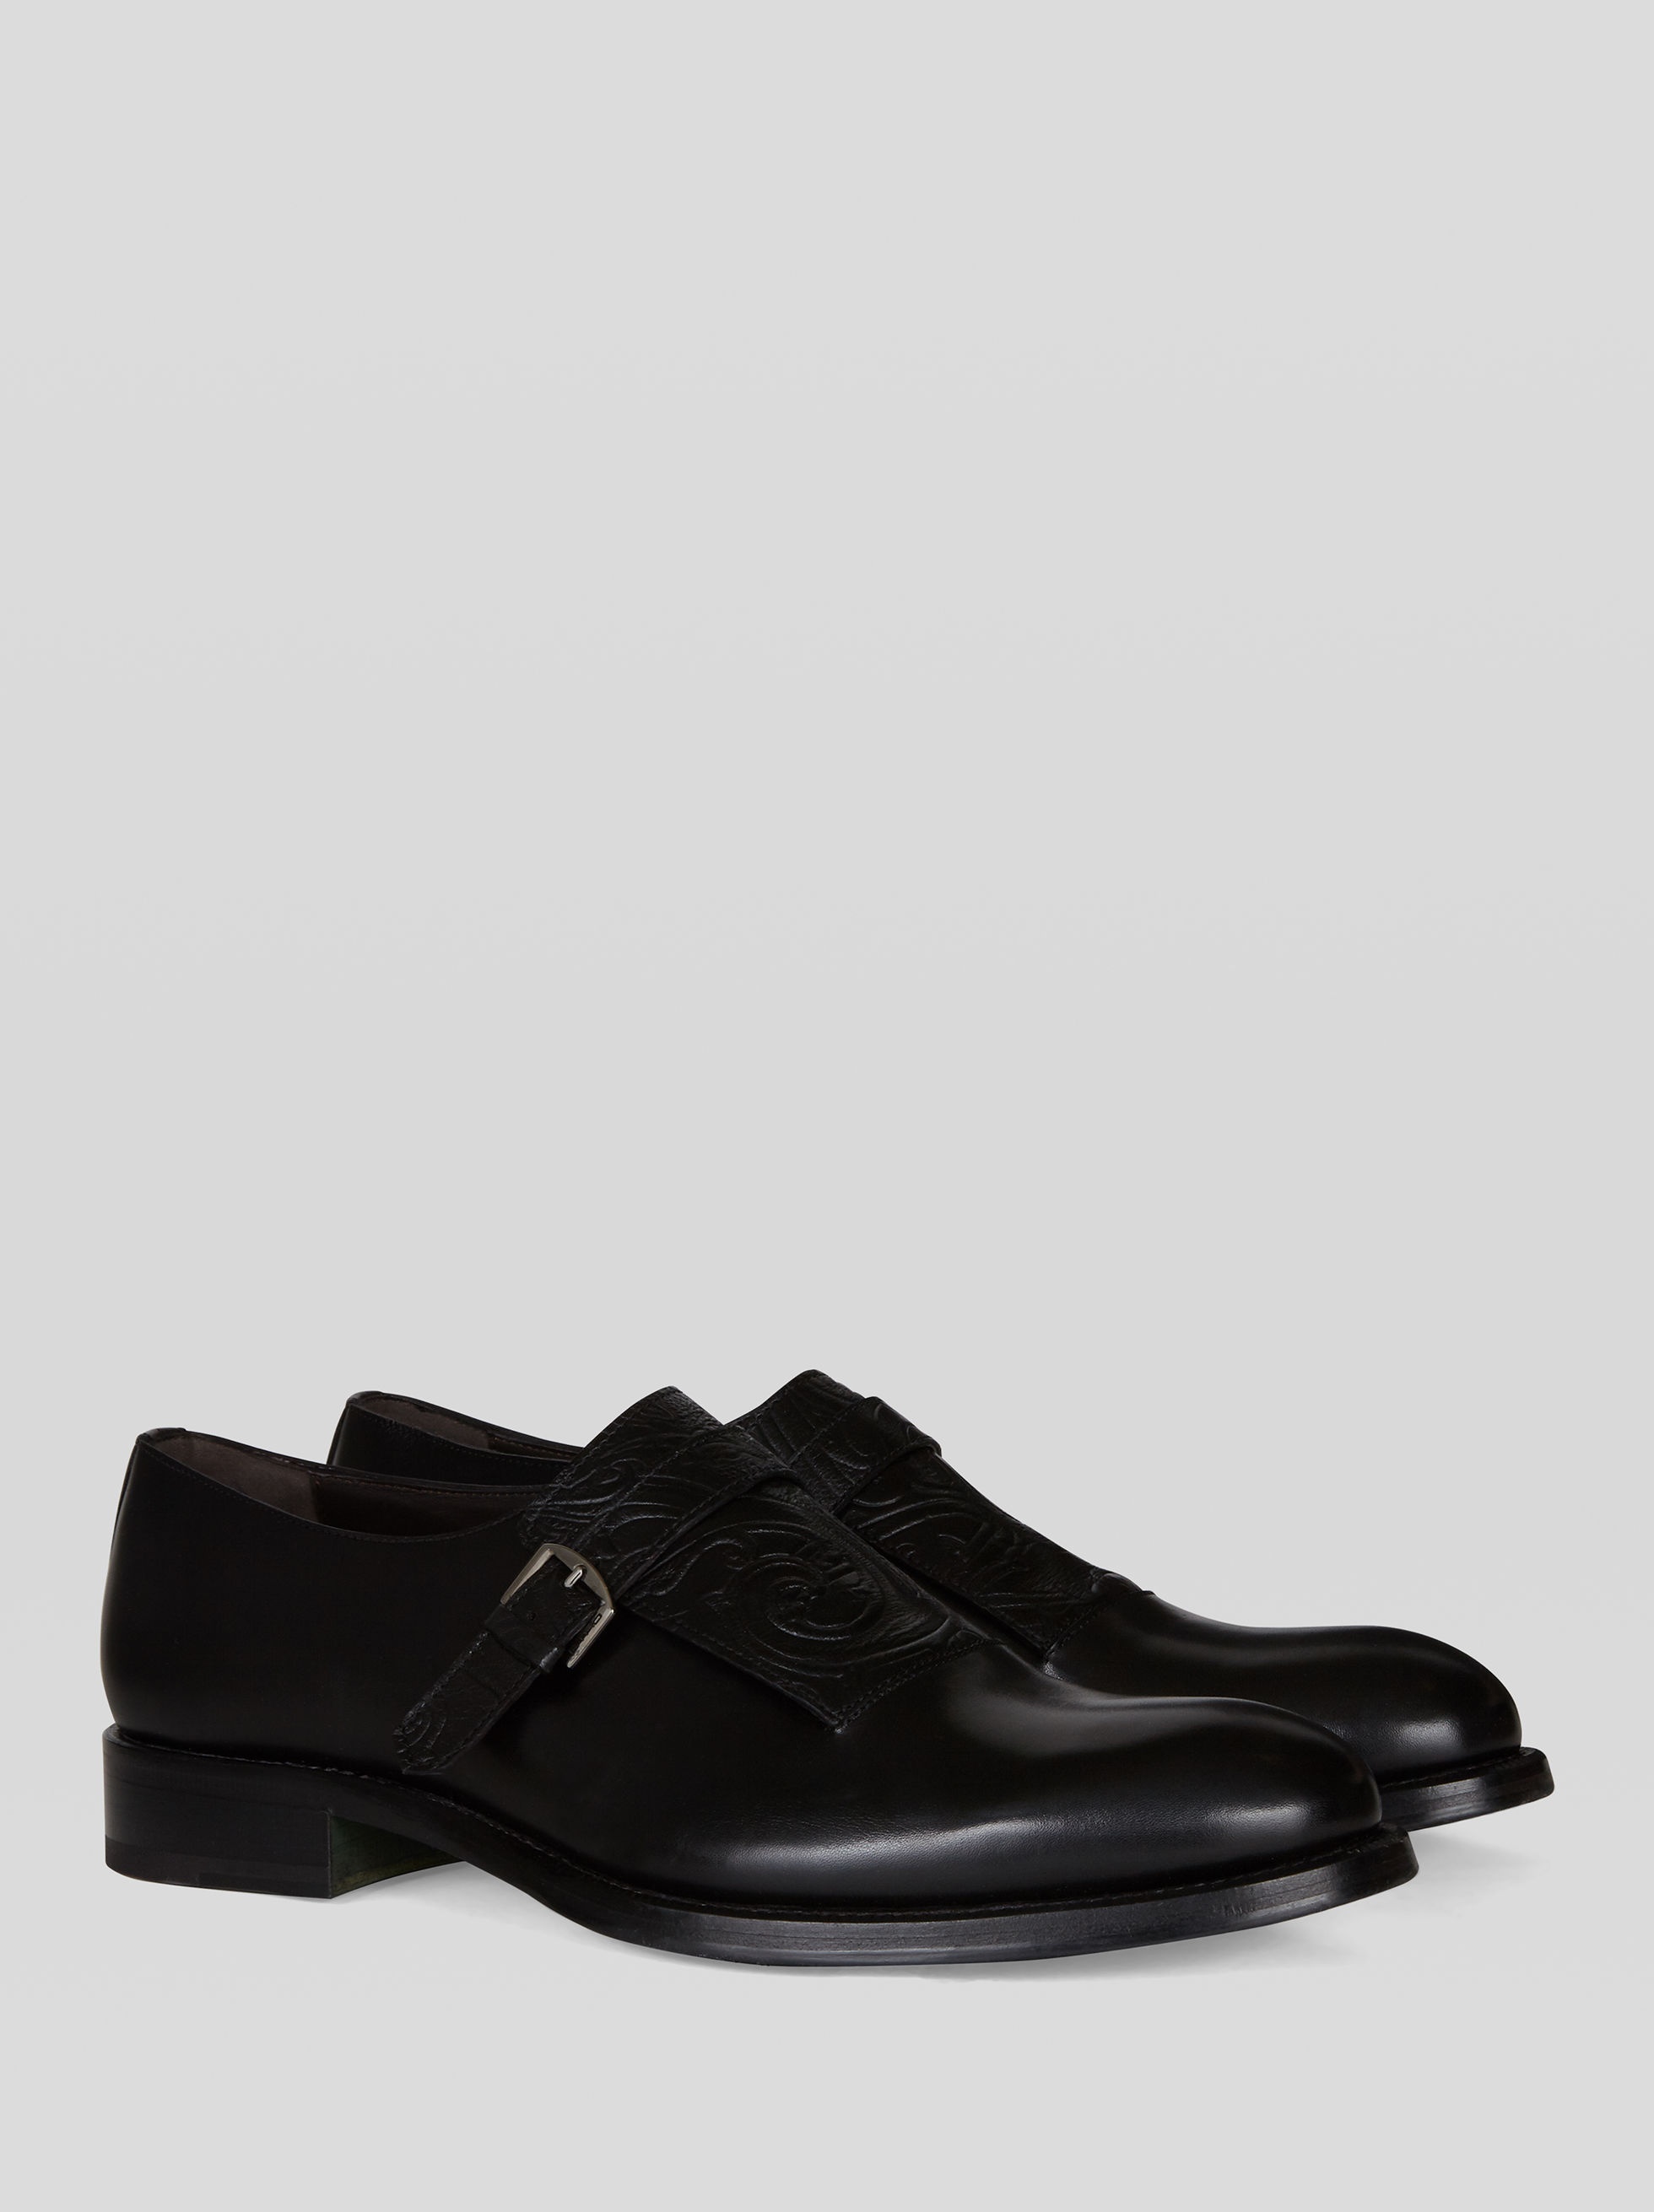 LEATHER MONK STRAPS WITH PAISLEY PATTERN - 3